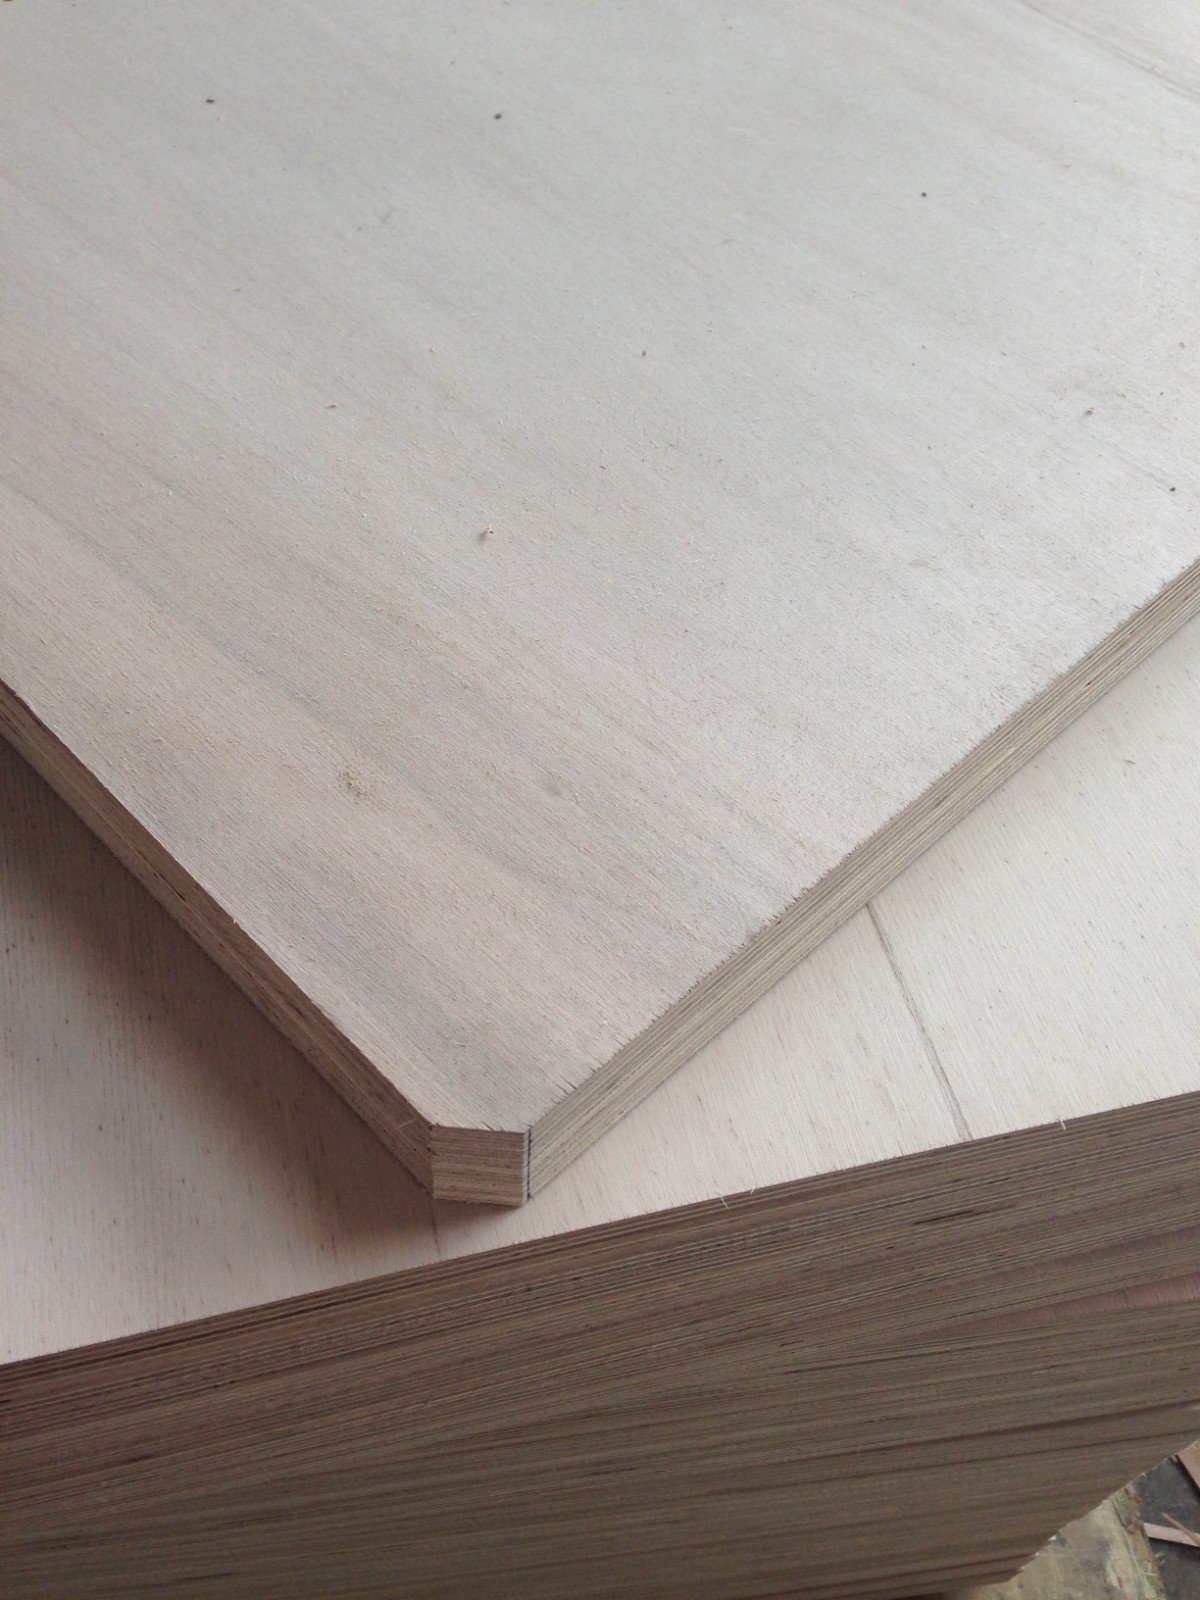 Hardwood plywood is made out of wood from angiosperm trees